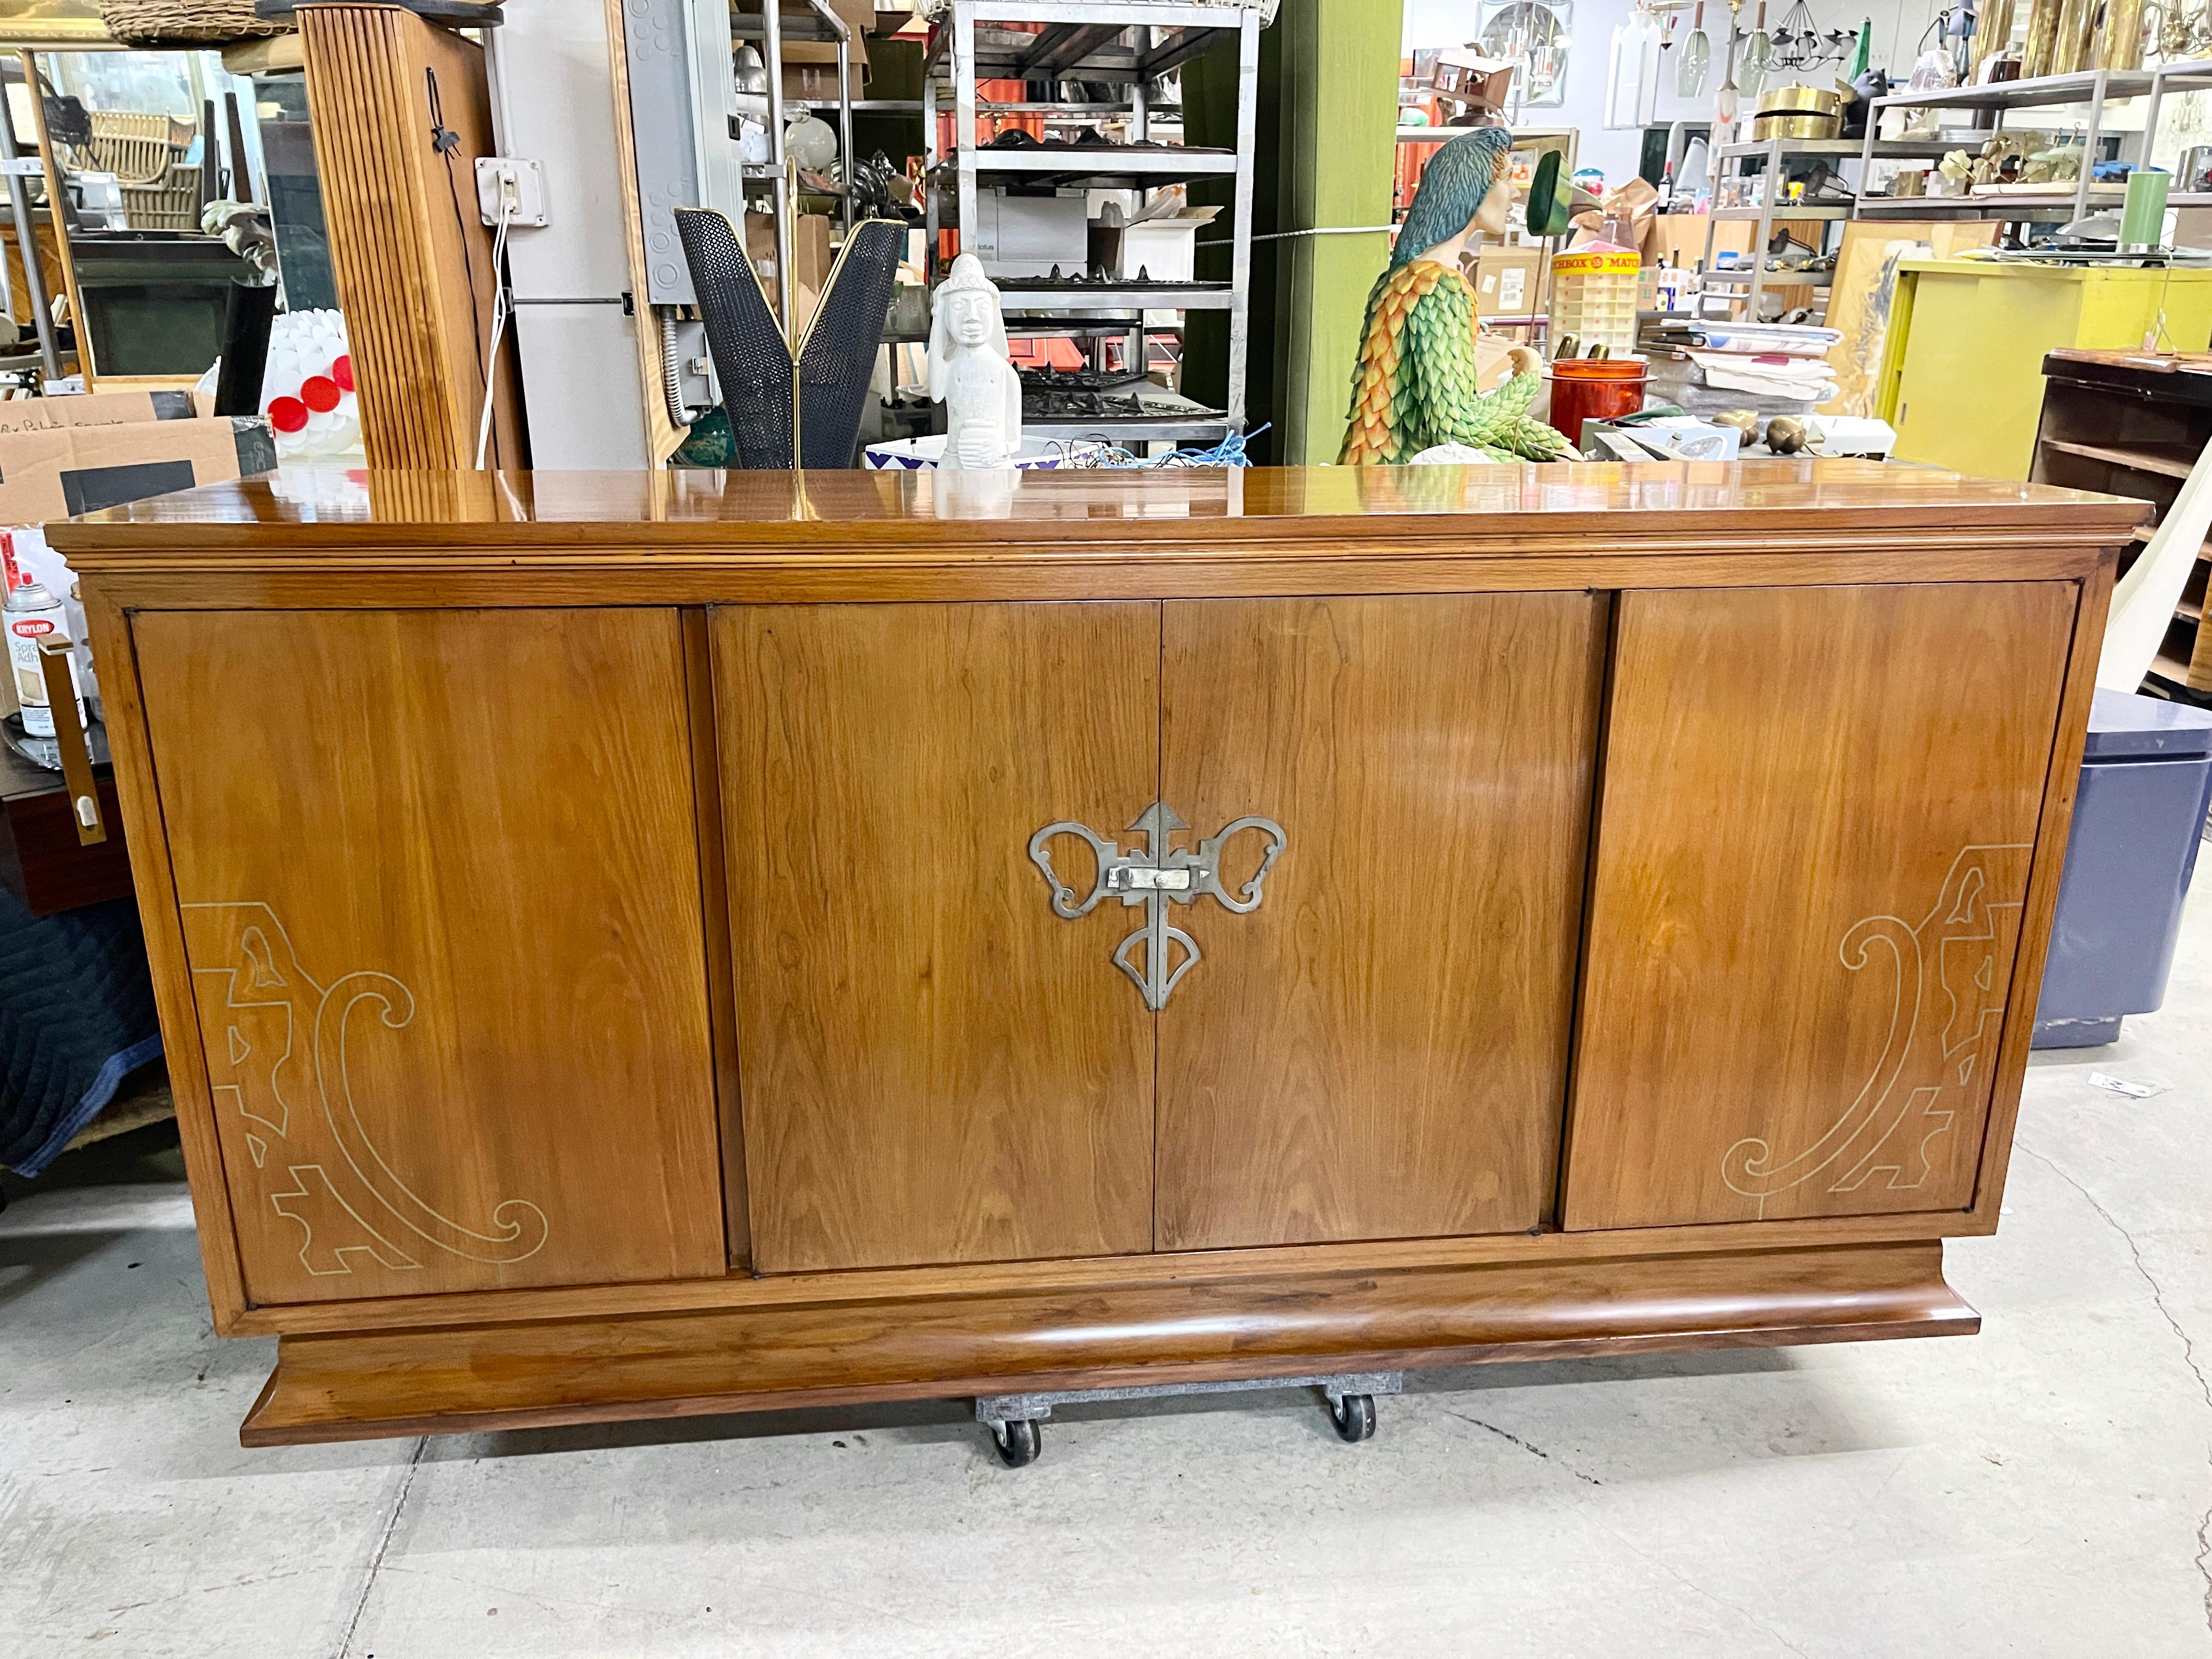 Early 1960's vintage custom made French walnut sideboard with illuminated bar cabinet having distinctive Jugendstil/fin-de-siecle/art nouveau style brass inlay within the left and right doors and an unusual ornamental latch made of patinated metal